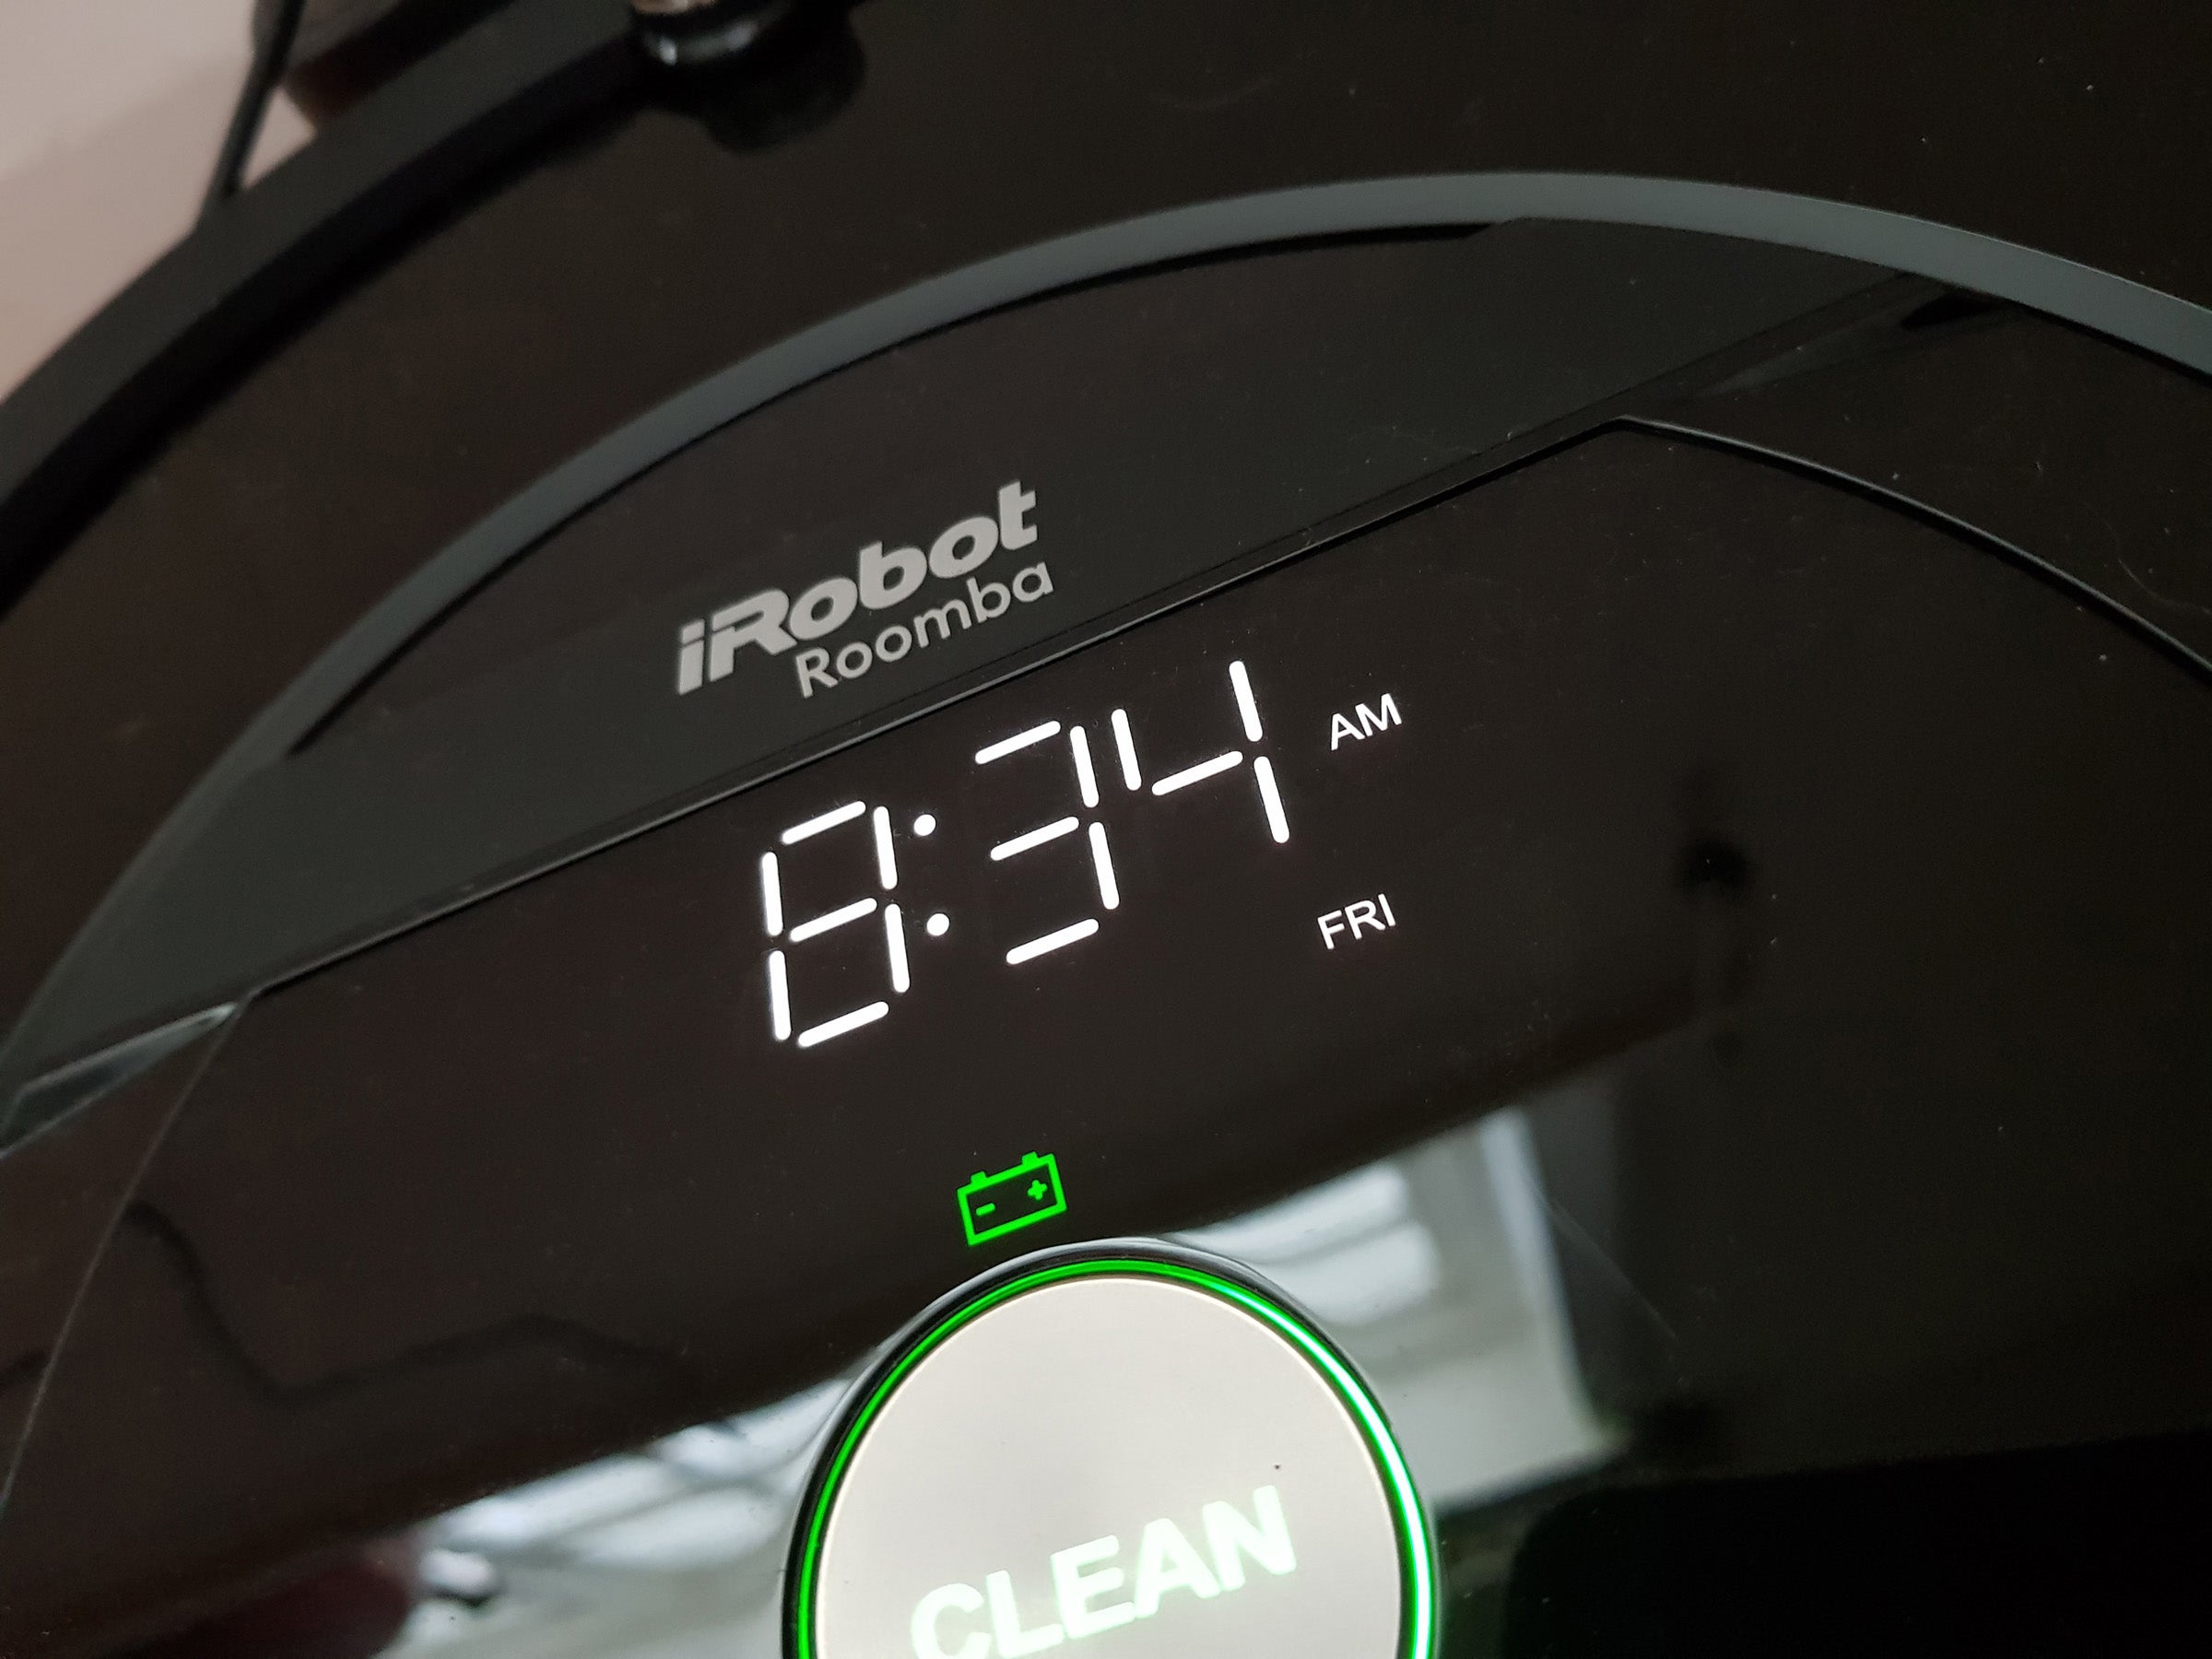 iRobot Roomba 875 display showing time and clean button.